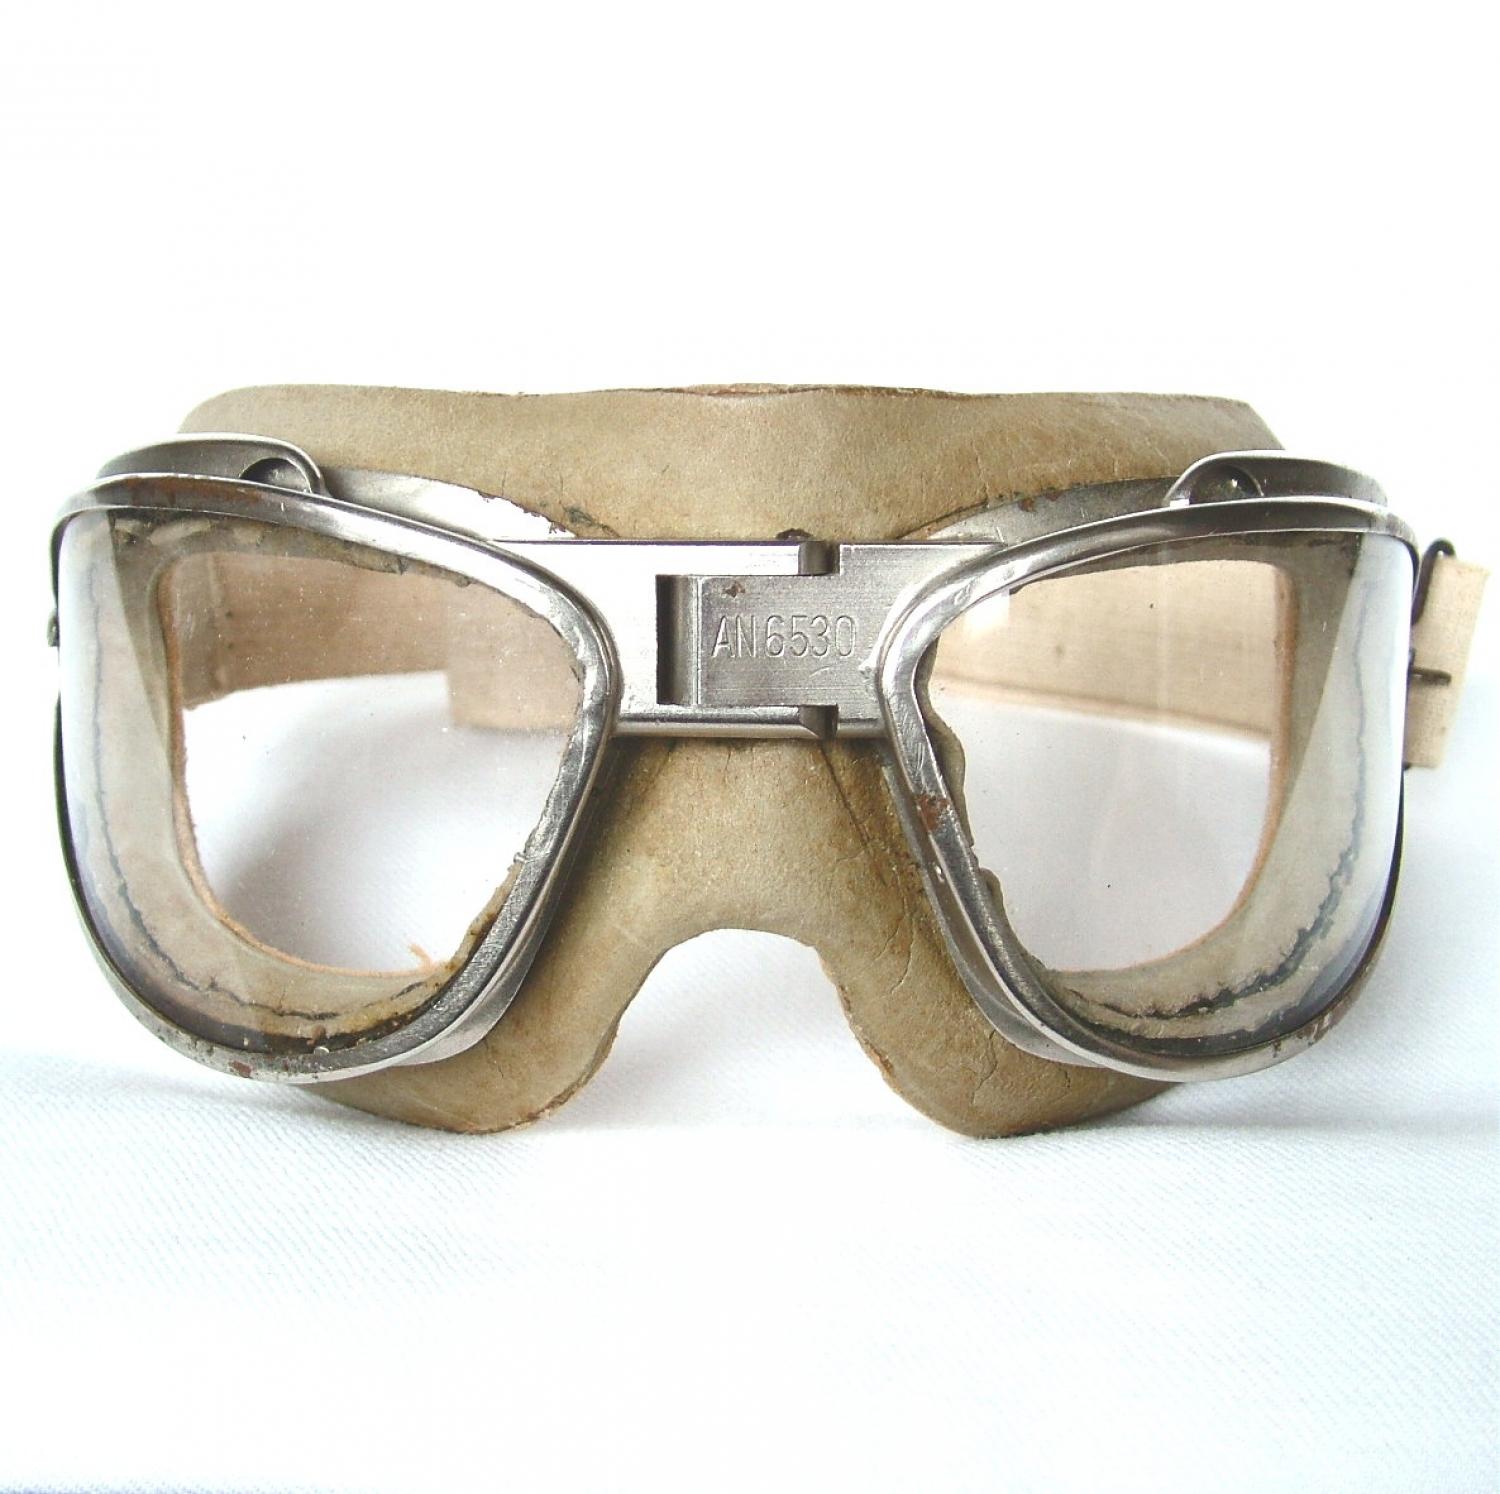 USAAF AN6530 Flying Goggles